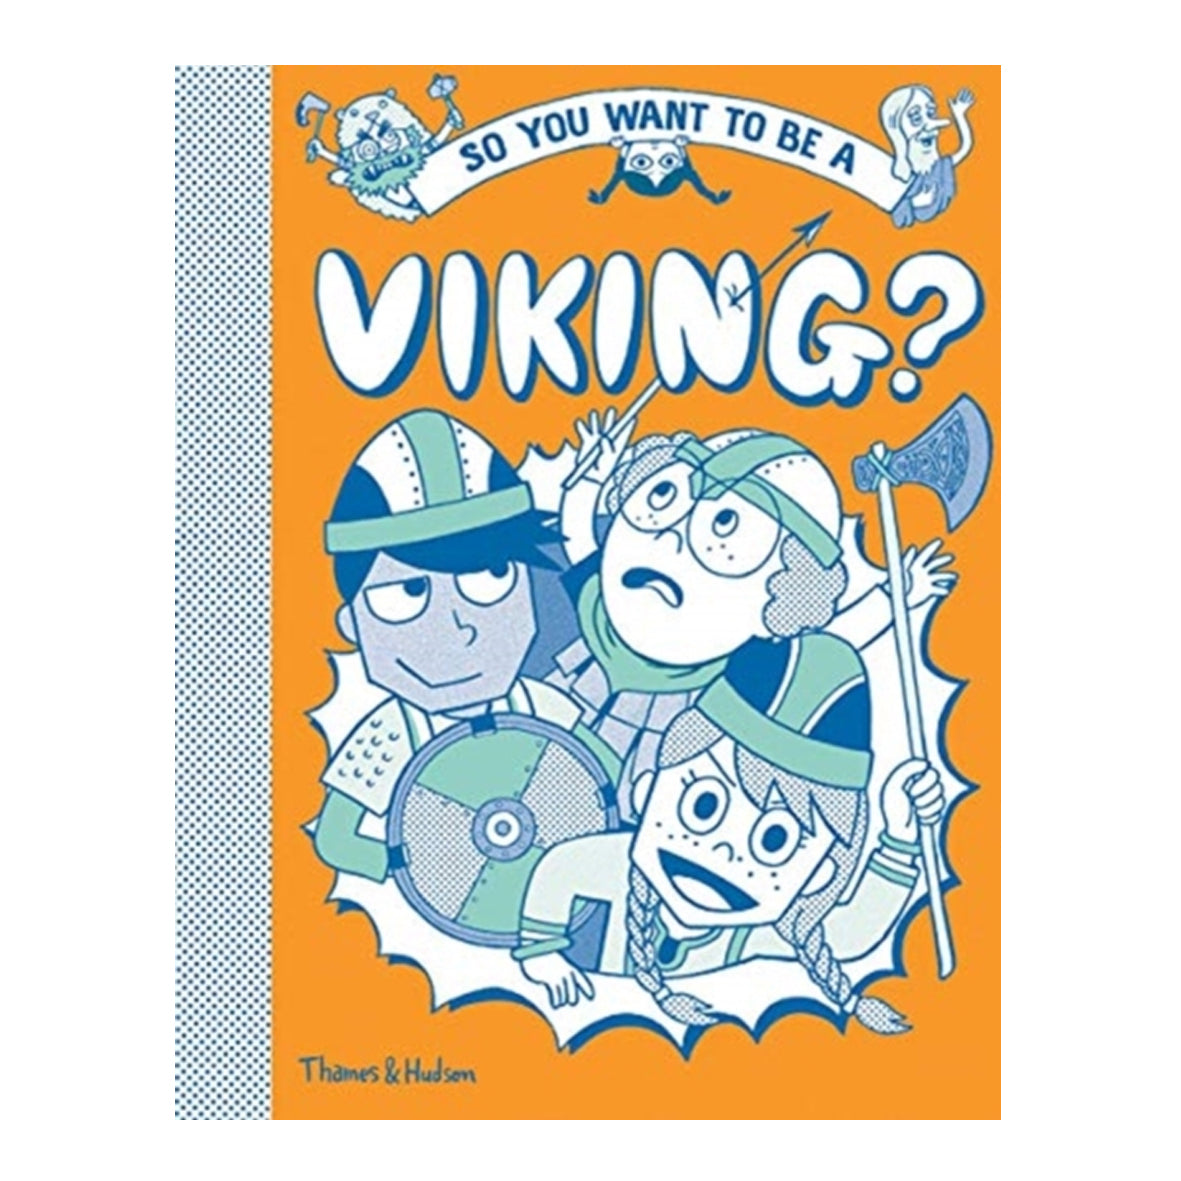 Book - So you want to be a Viking?